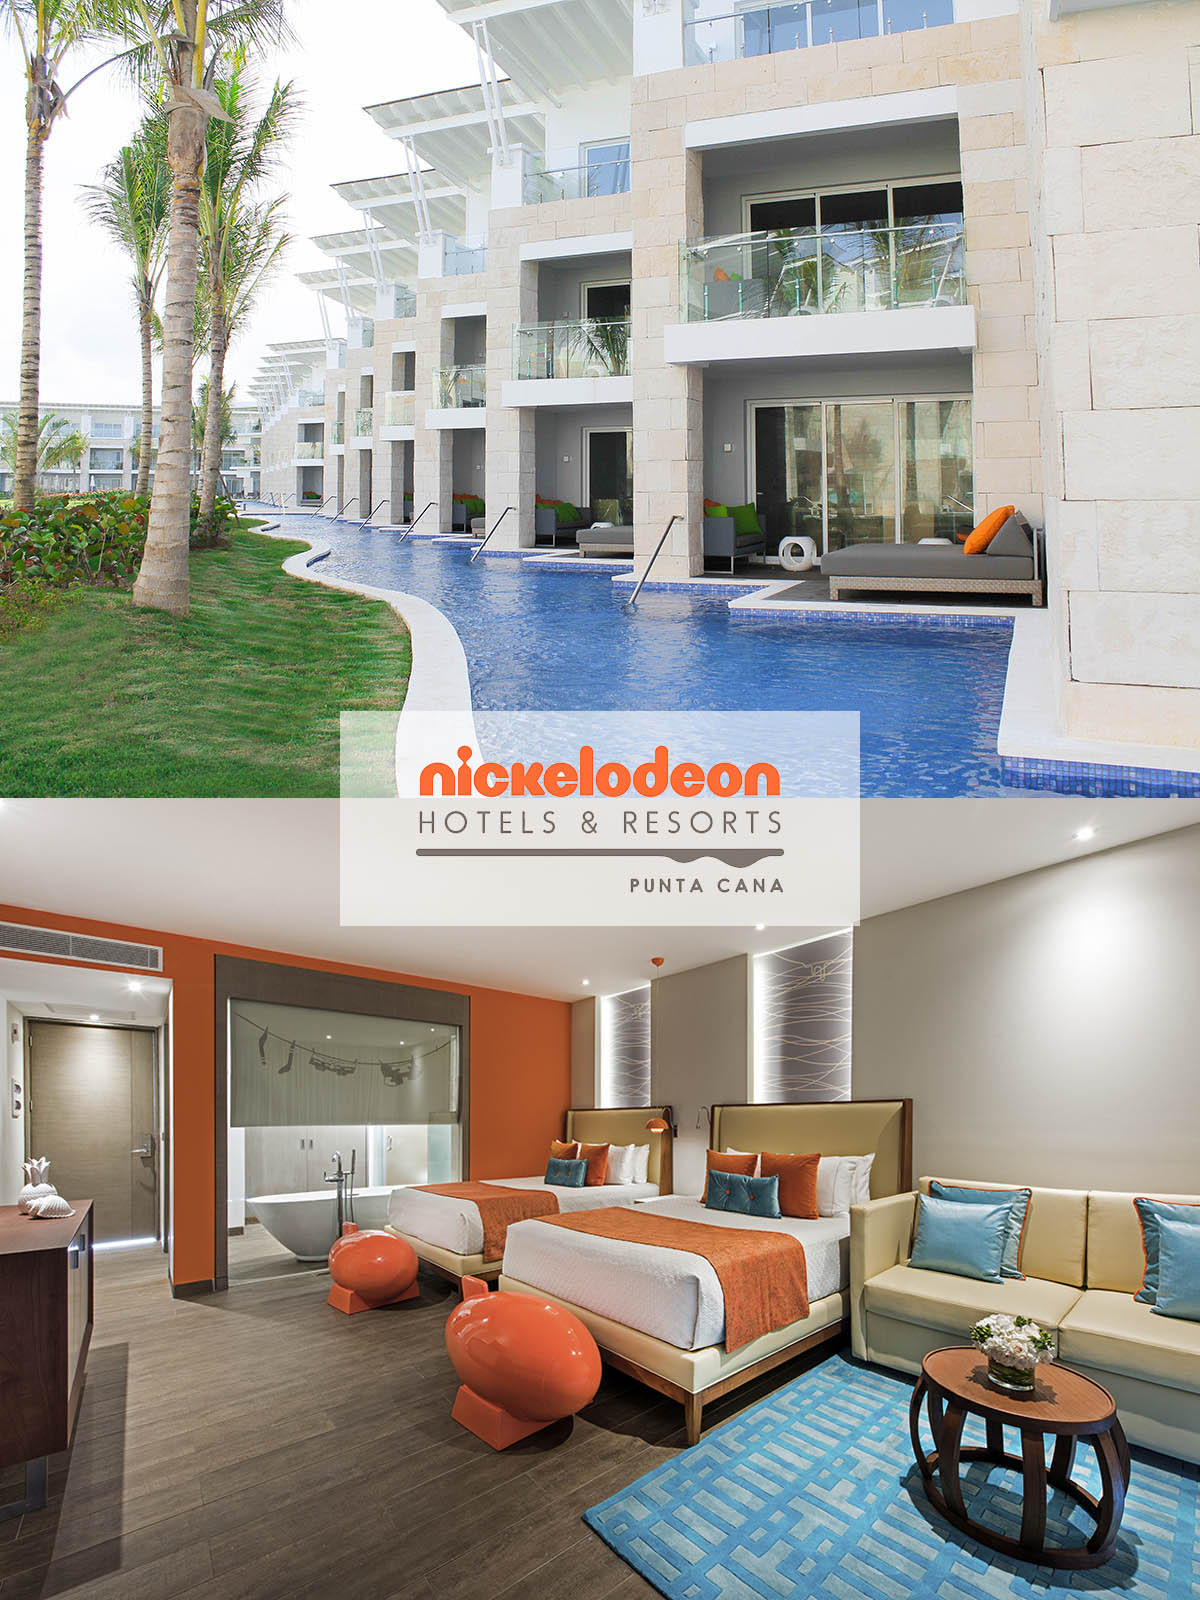 Nickelodeon Resorts & Hotels Punta Cana - all inclusive resort vacation for families